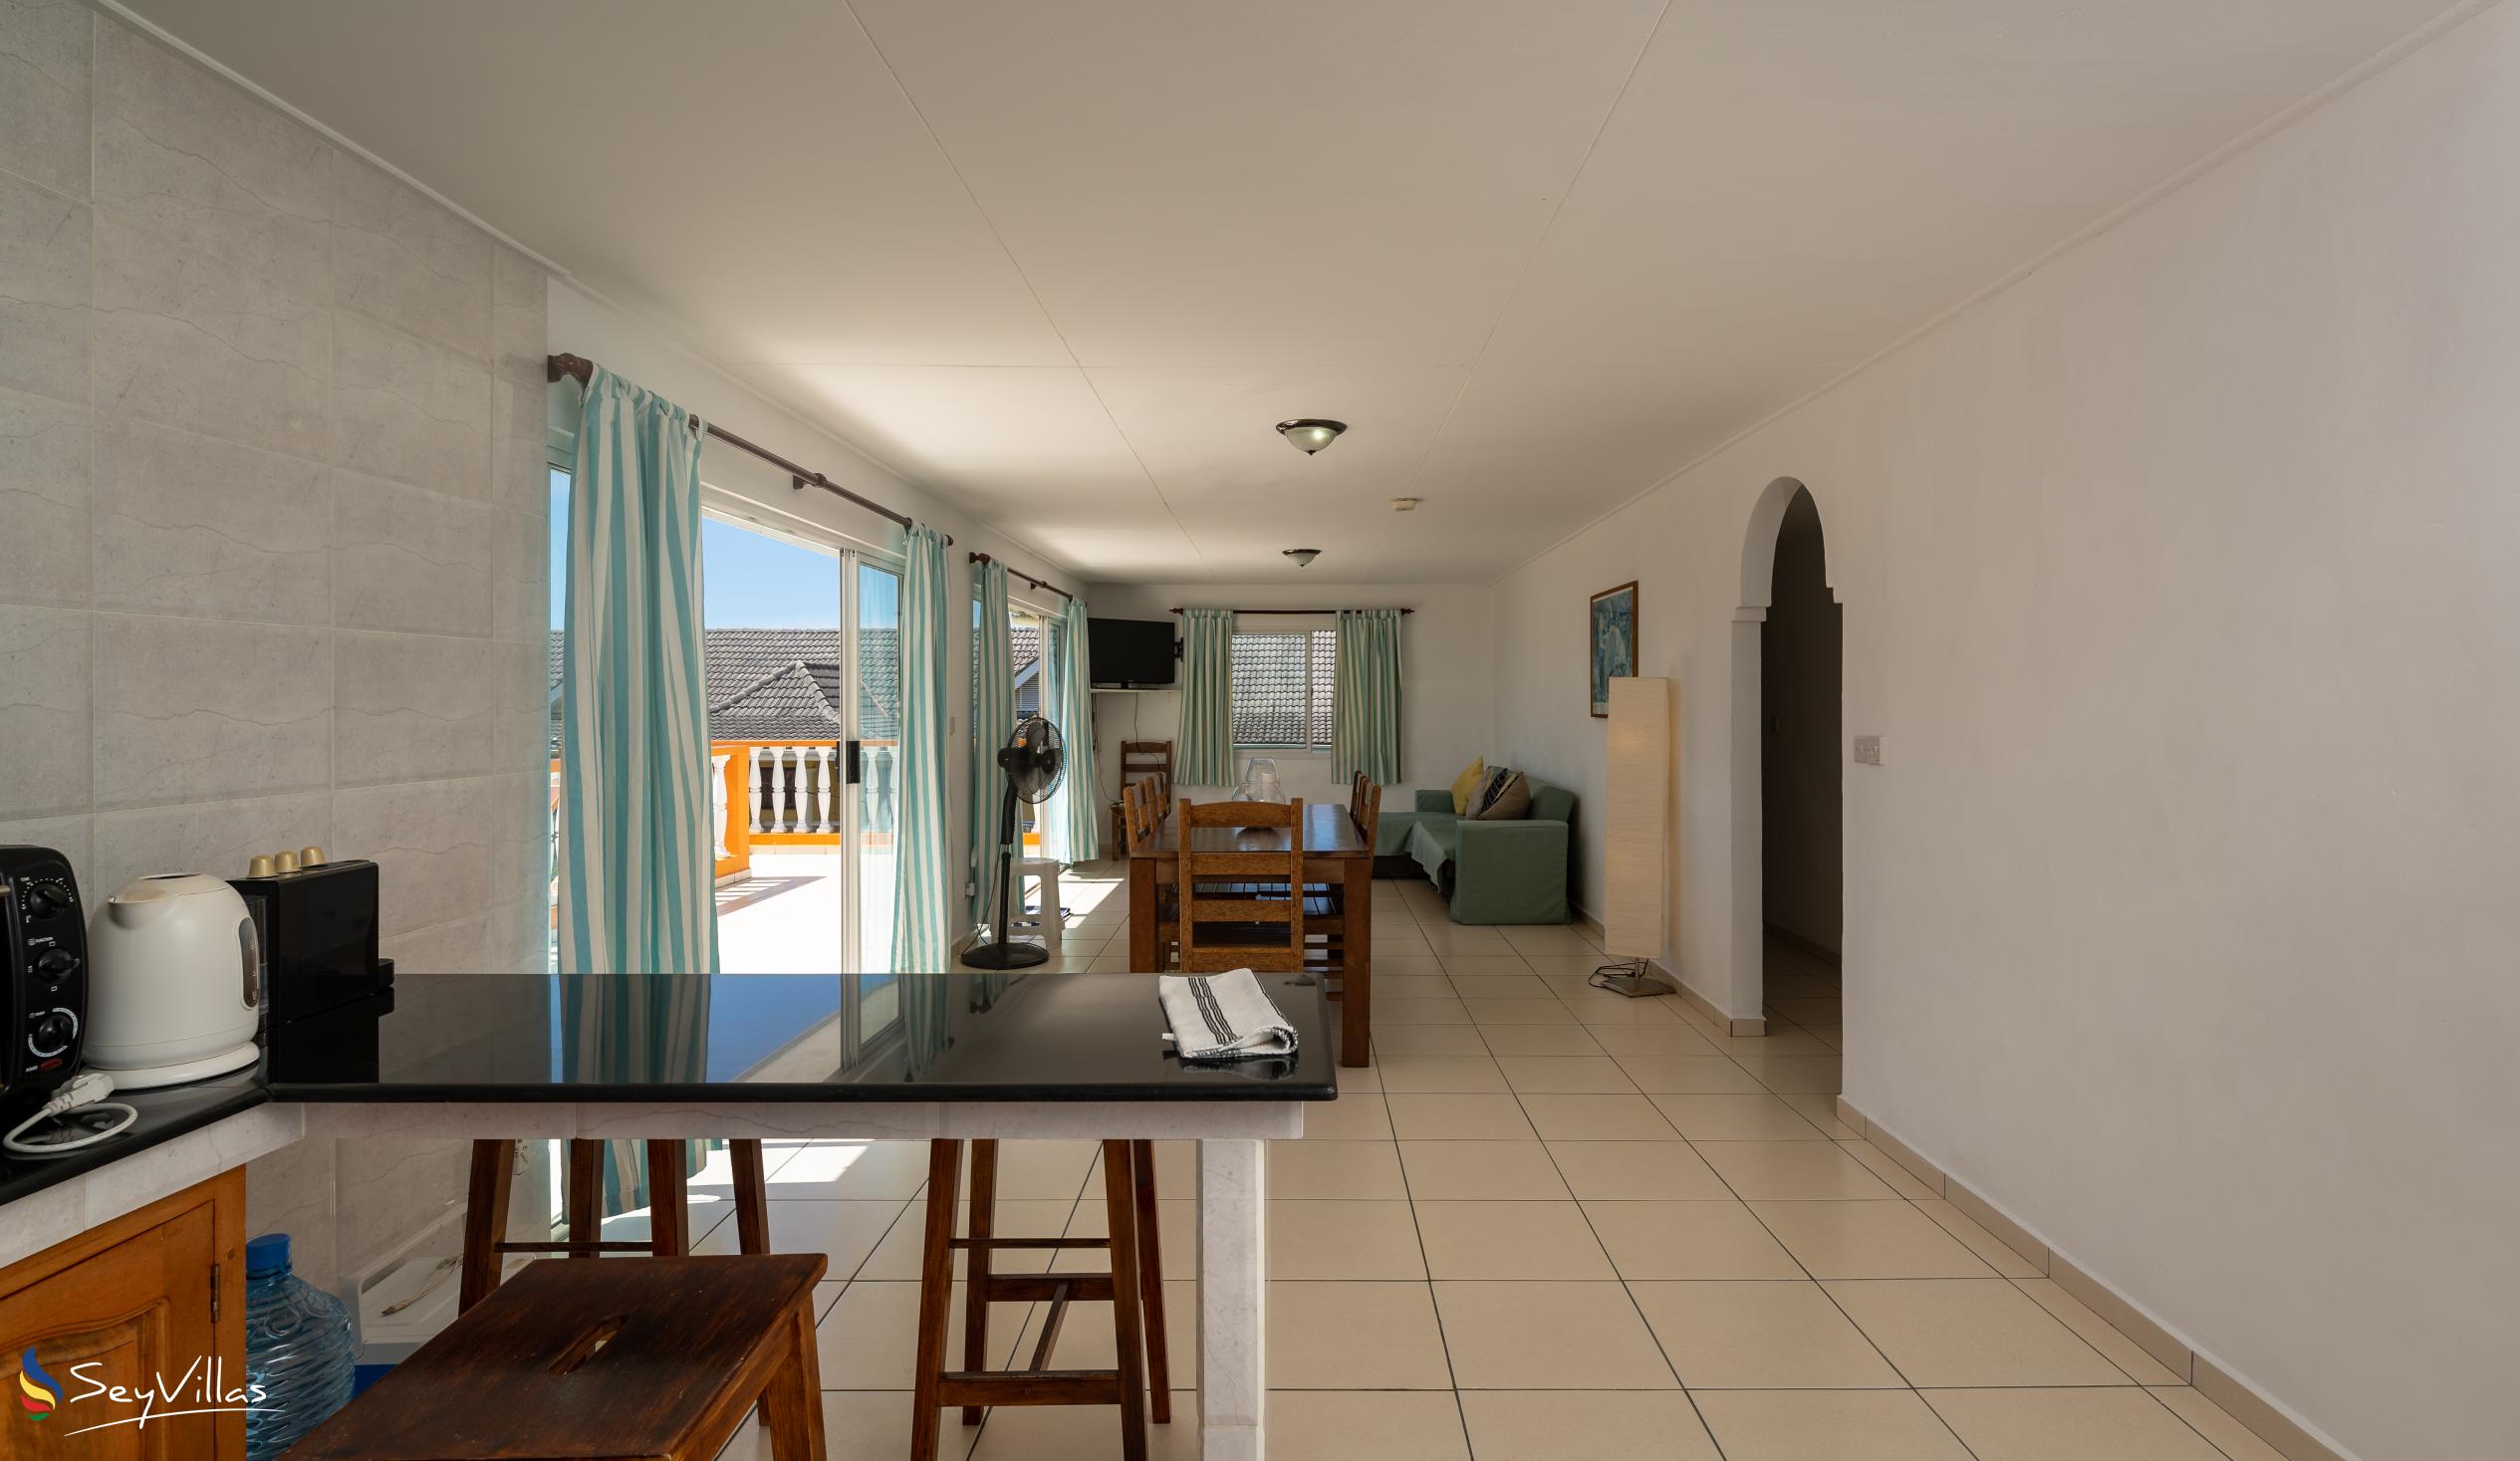 Foto 53: Chez Payet Self Catering - 2-Schlafzimmer-Appartement Coco - Mahé (Seychellen)